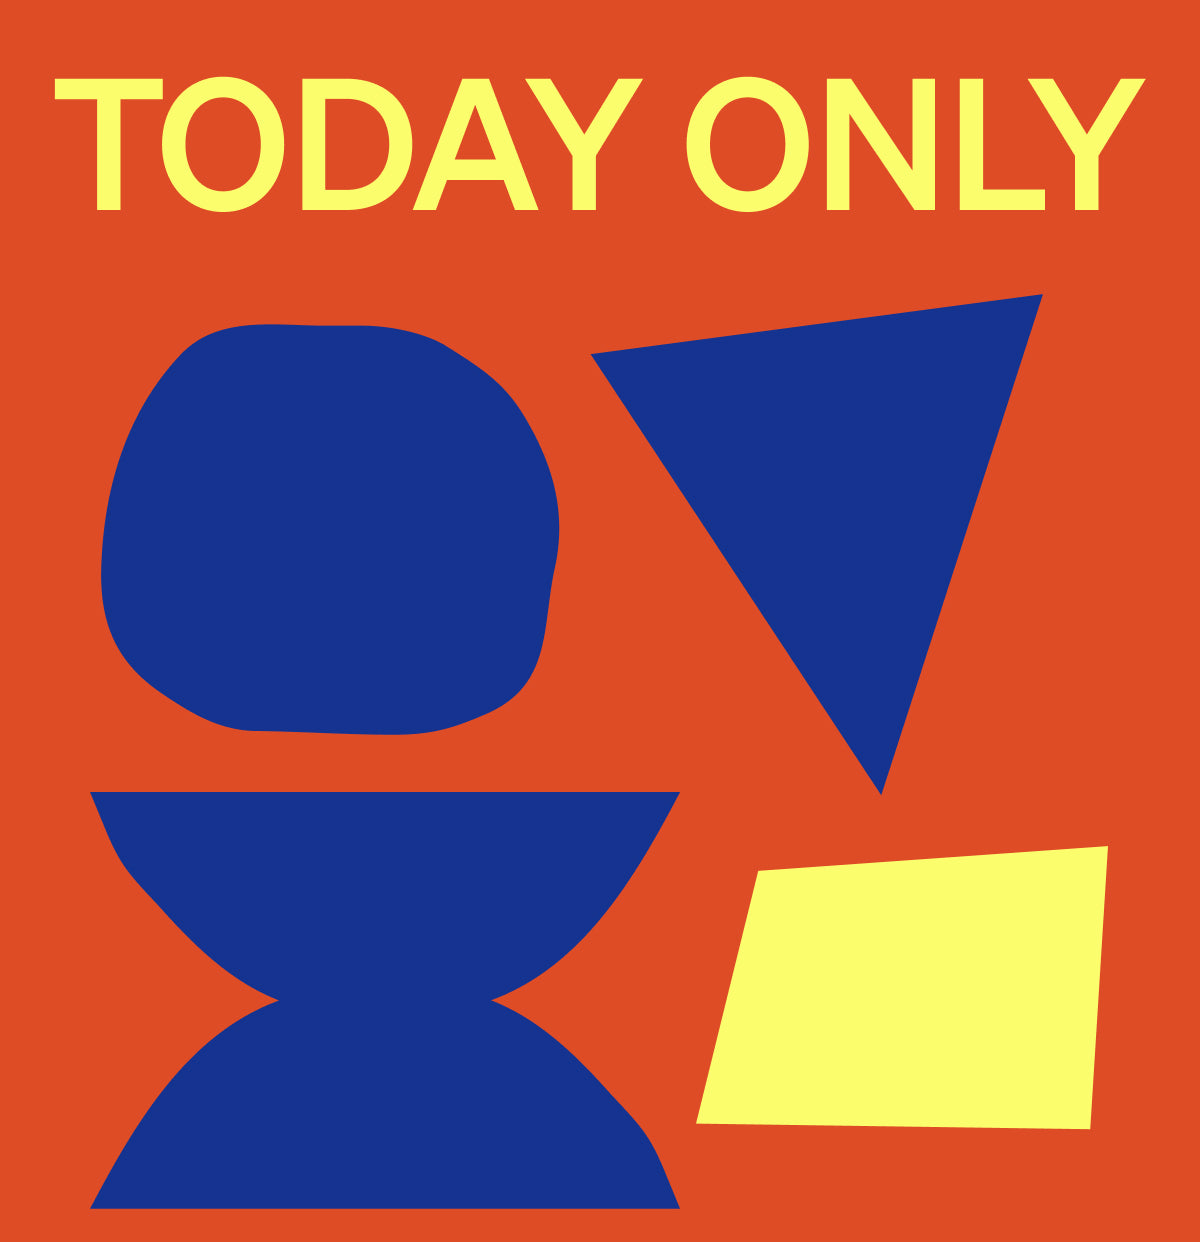 TODAY ONLY